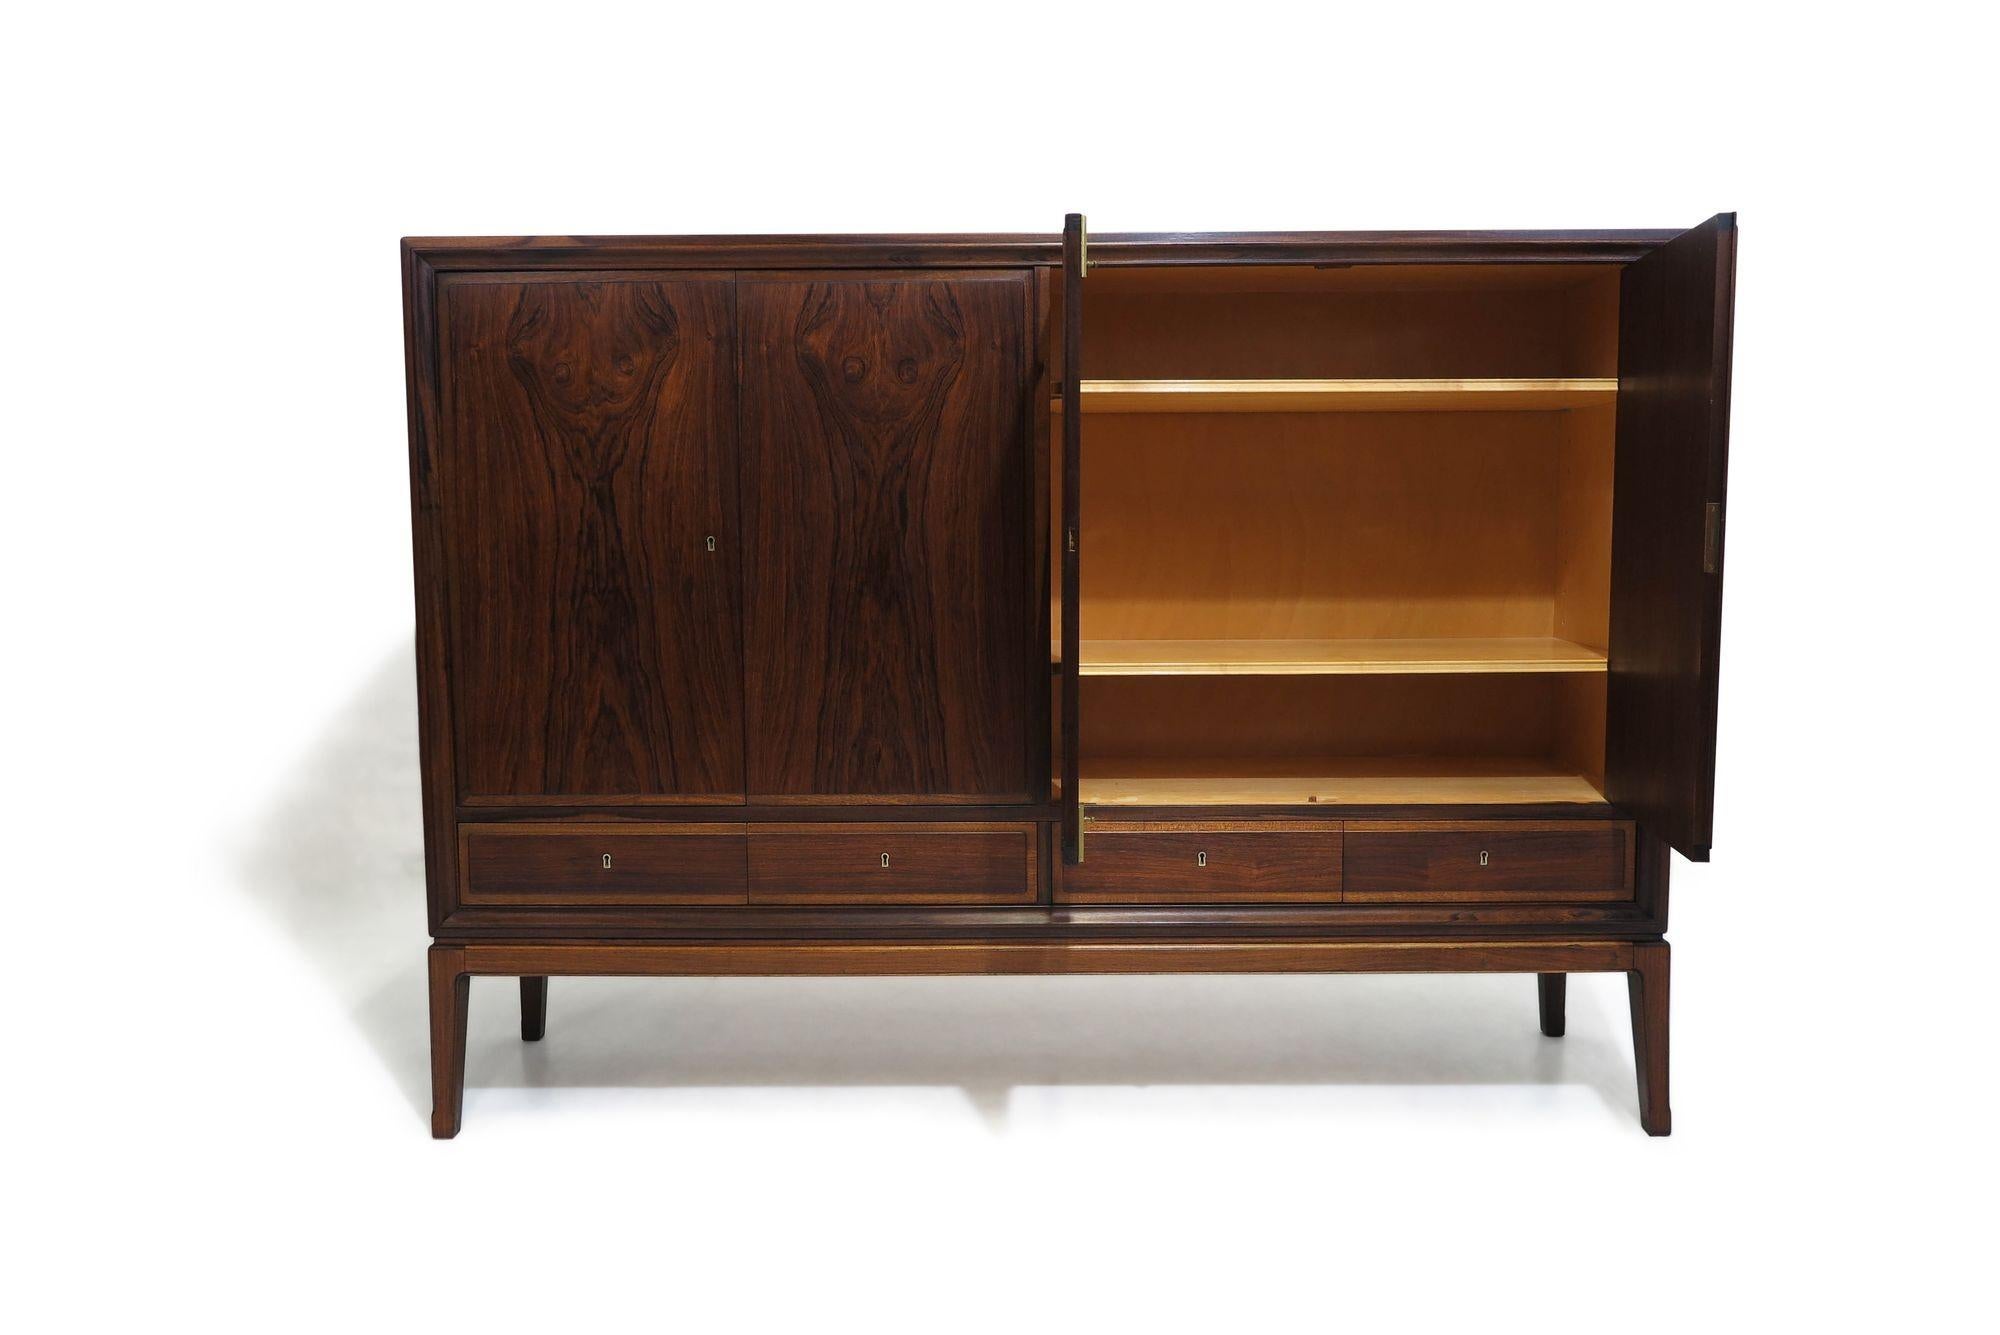 Oiled Ole Wanscher Brazilian Rosewood Sideboard For Sale